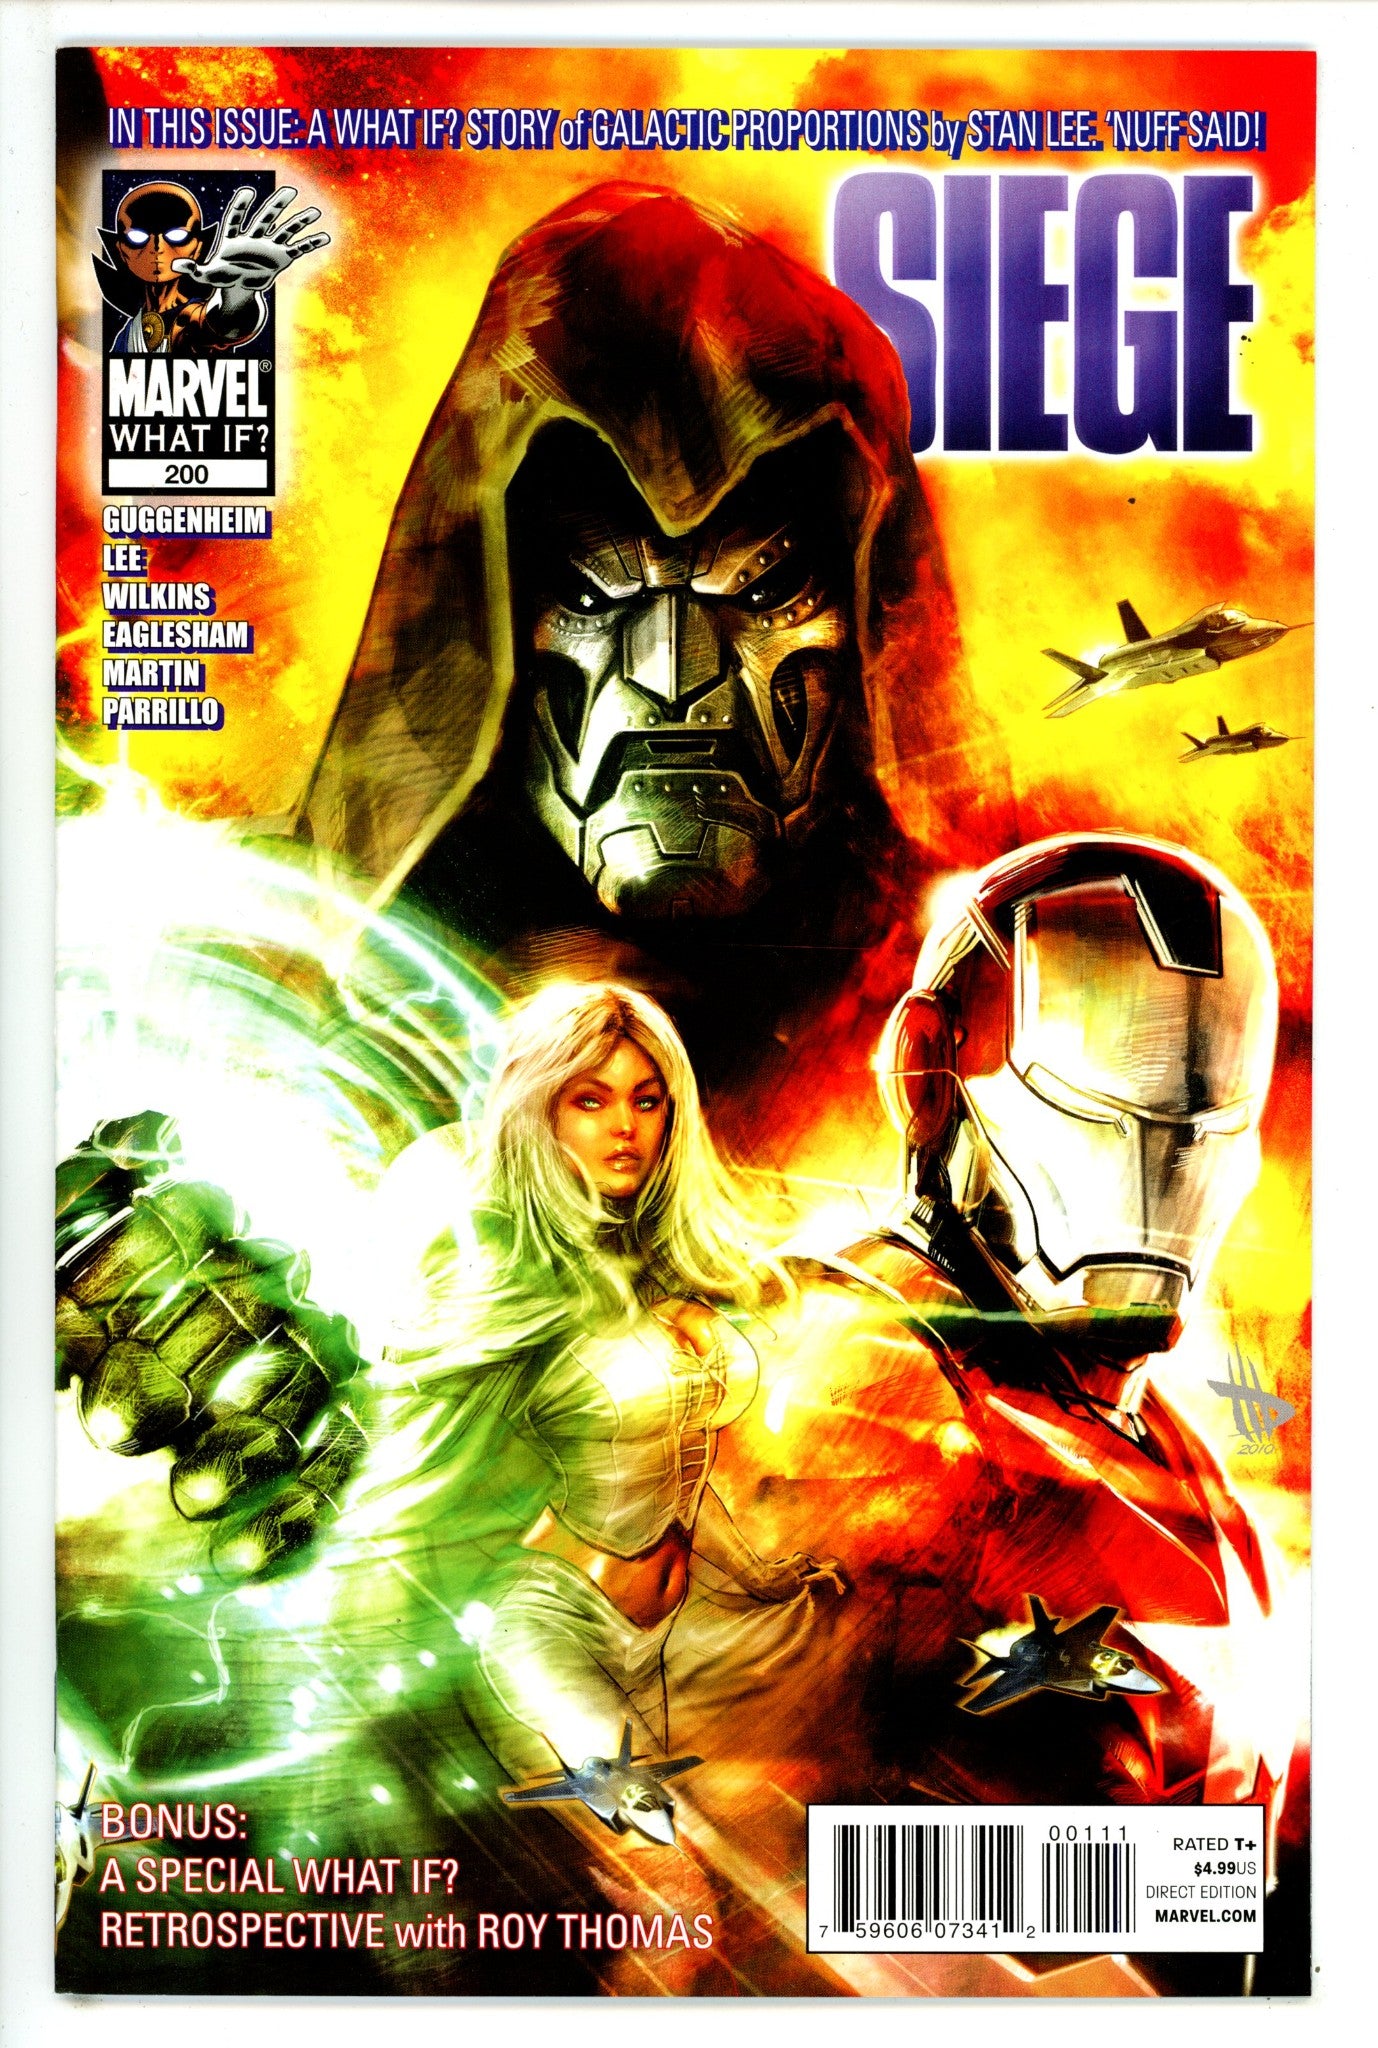 What If? 200 Vol 4 1 NM- (9.2) (2011) 